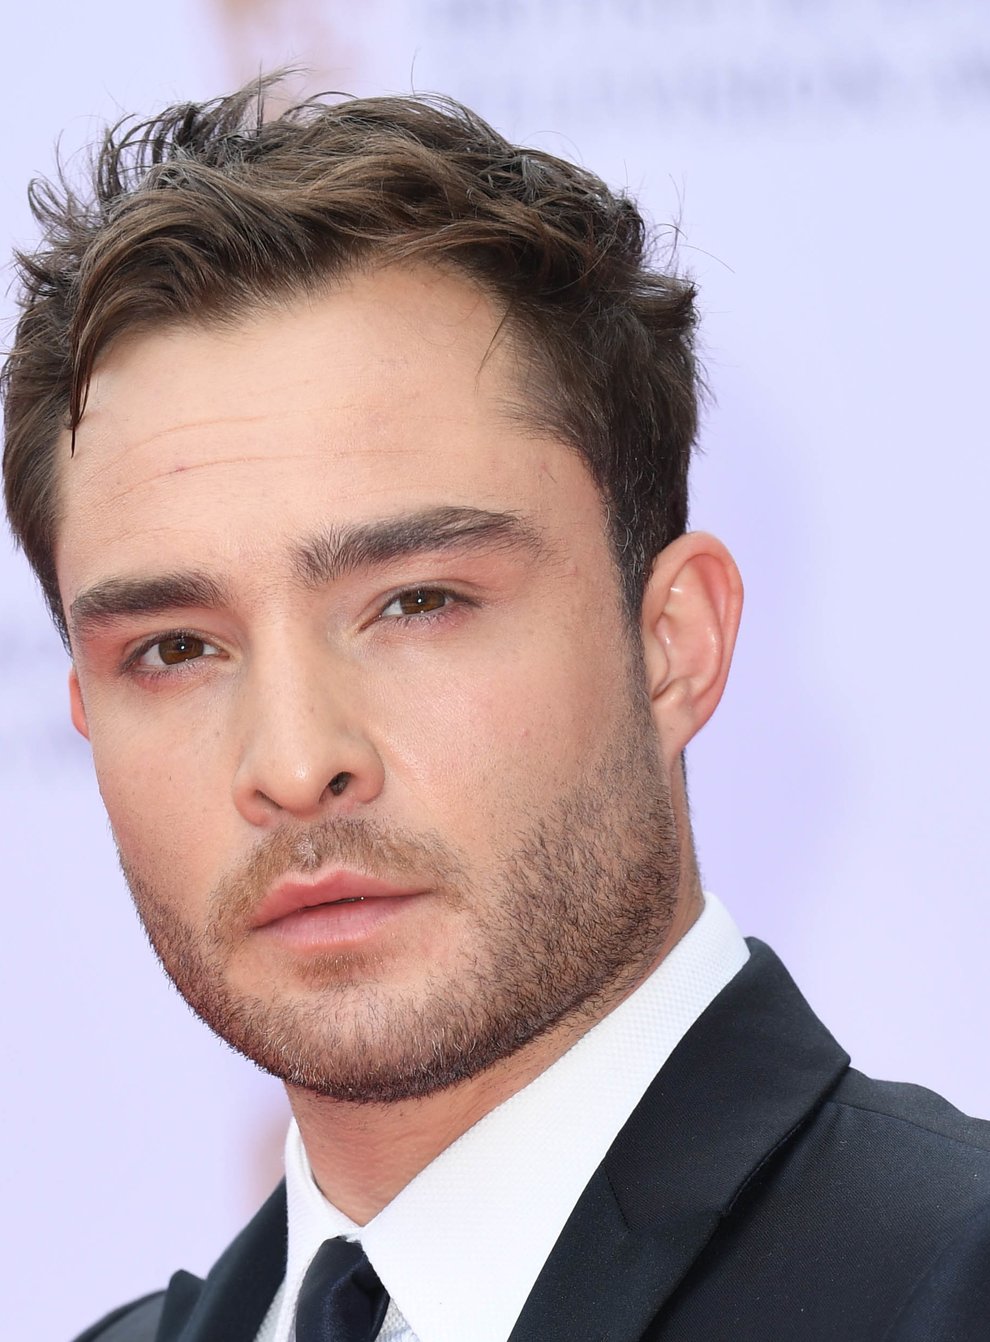 Fans were hopeful Westwick would be returning to the show